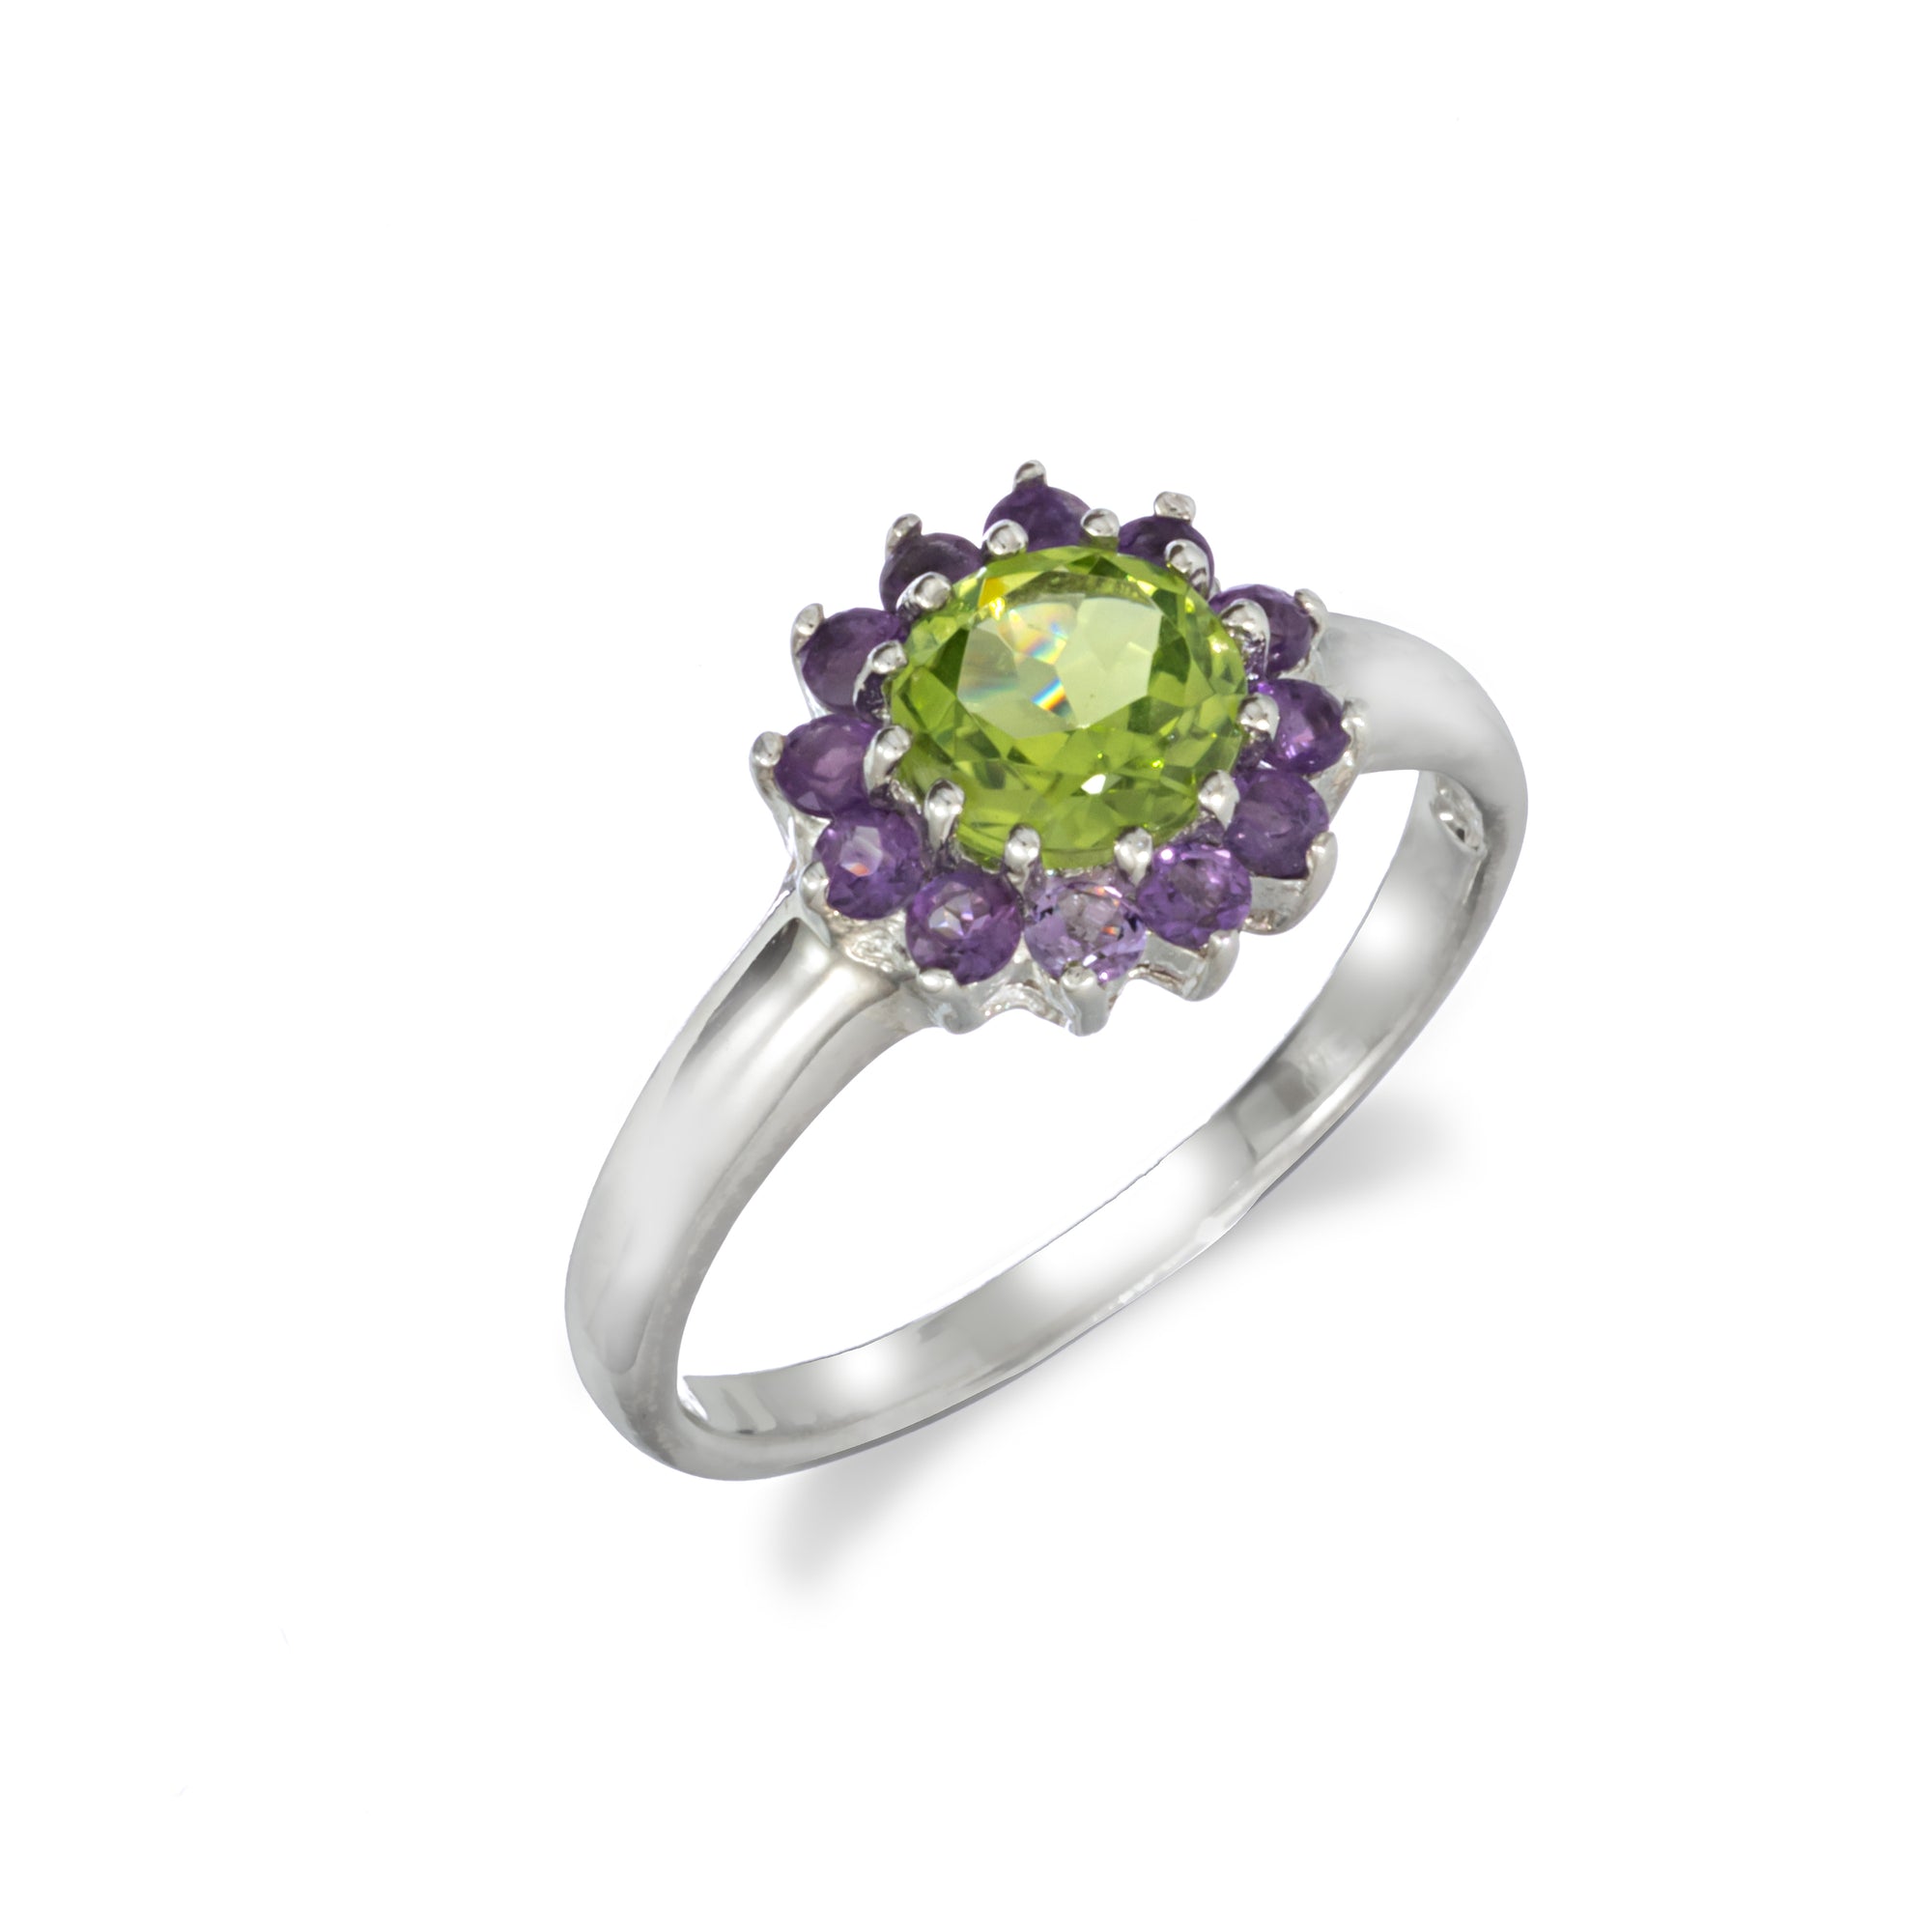 Peridot and Amethyst Flower Ring